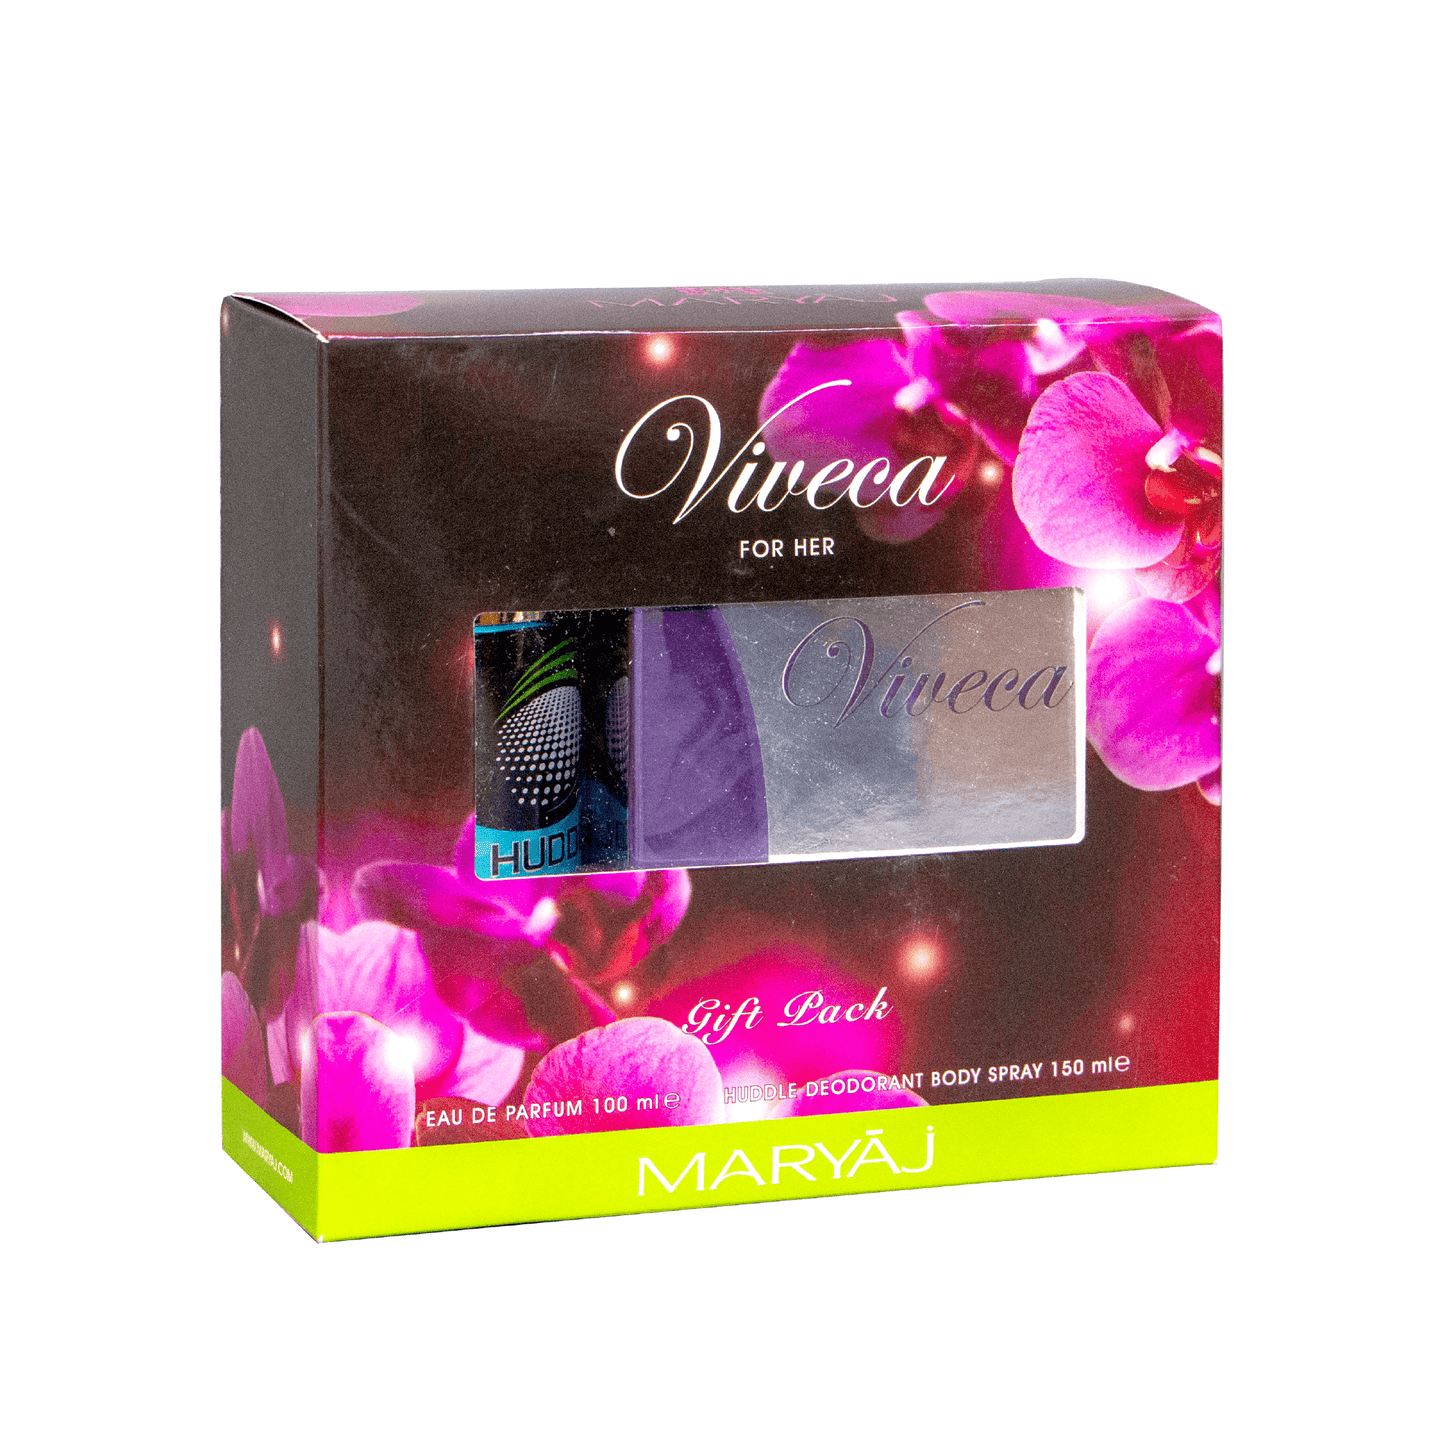 VIVECA Perfume Gift Set For Women with HUDDLE 9 Deo